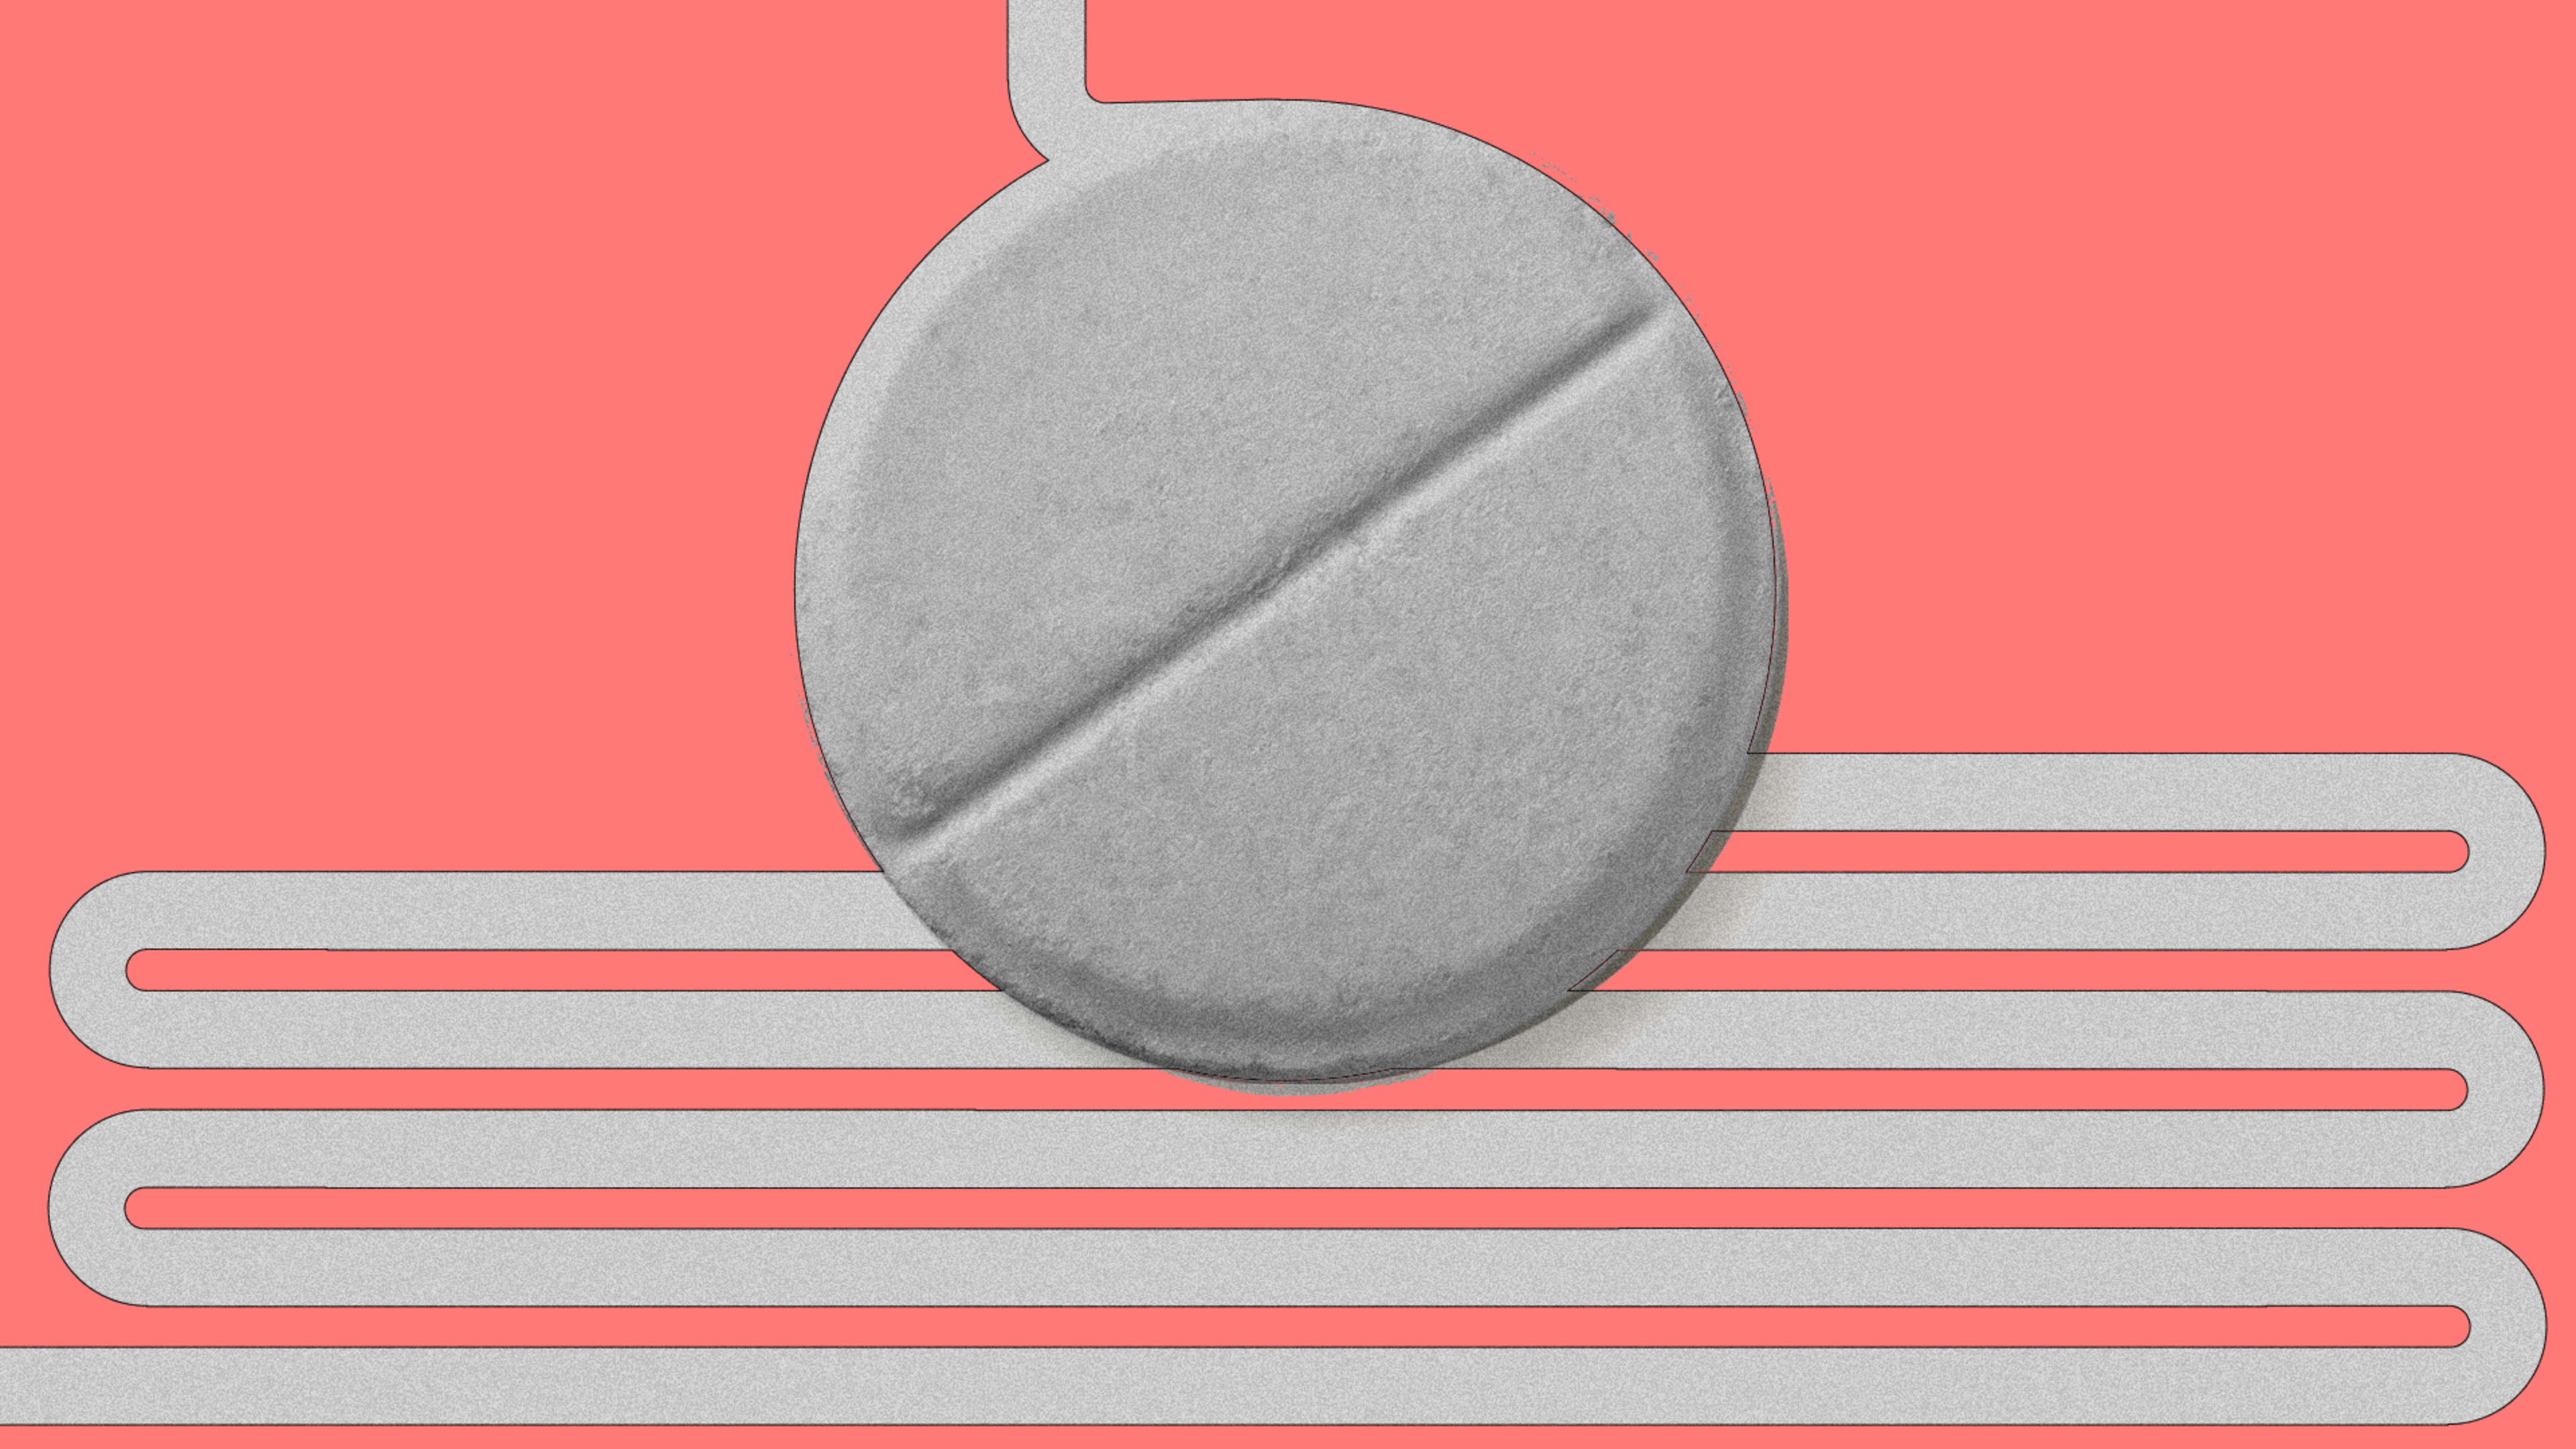 Future pills will be personalized and 3D printed, just for you